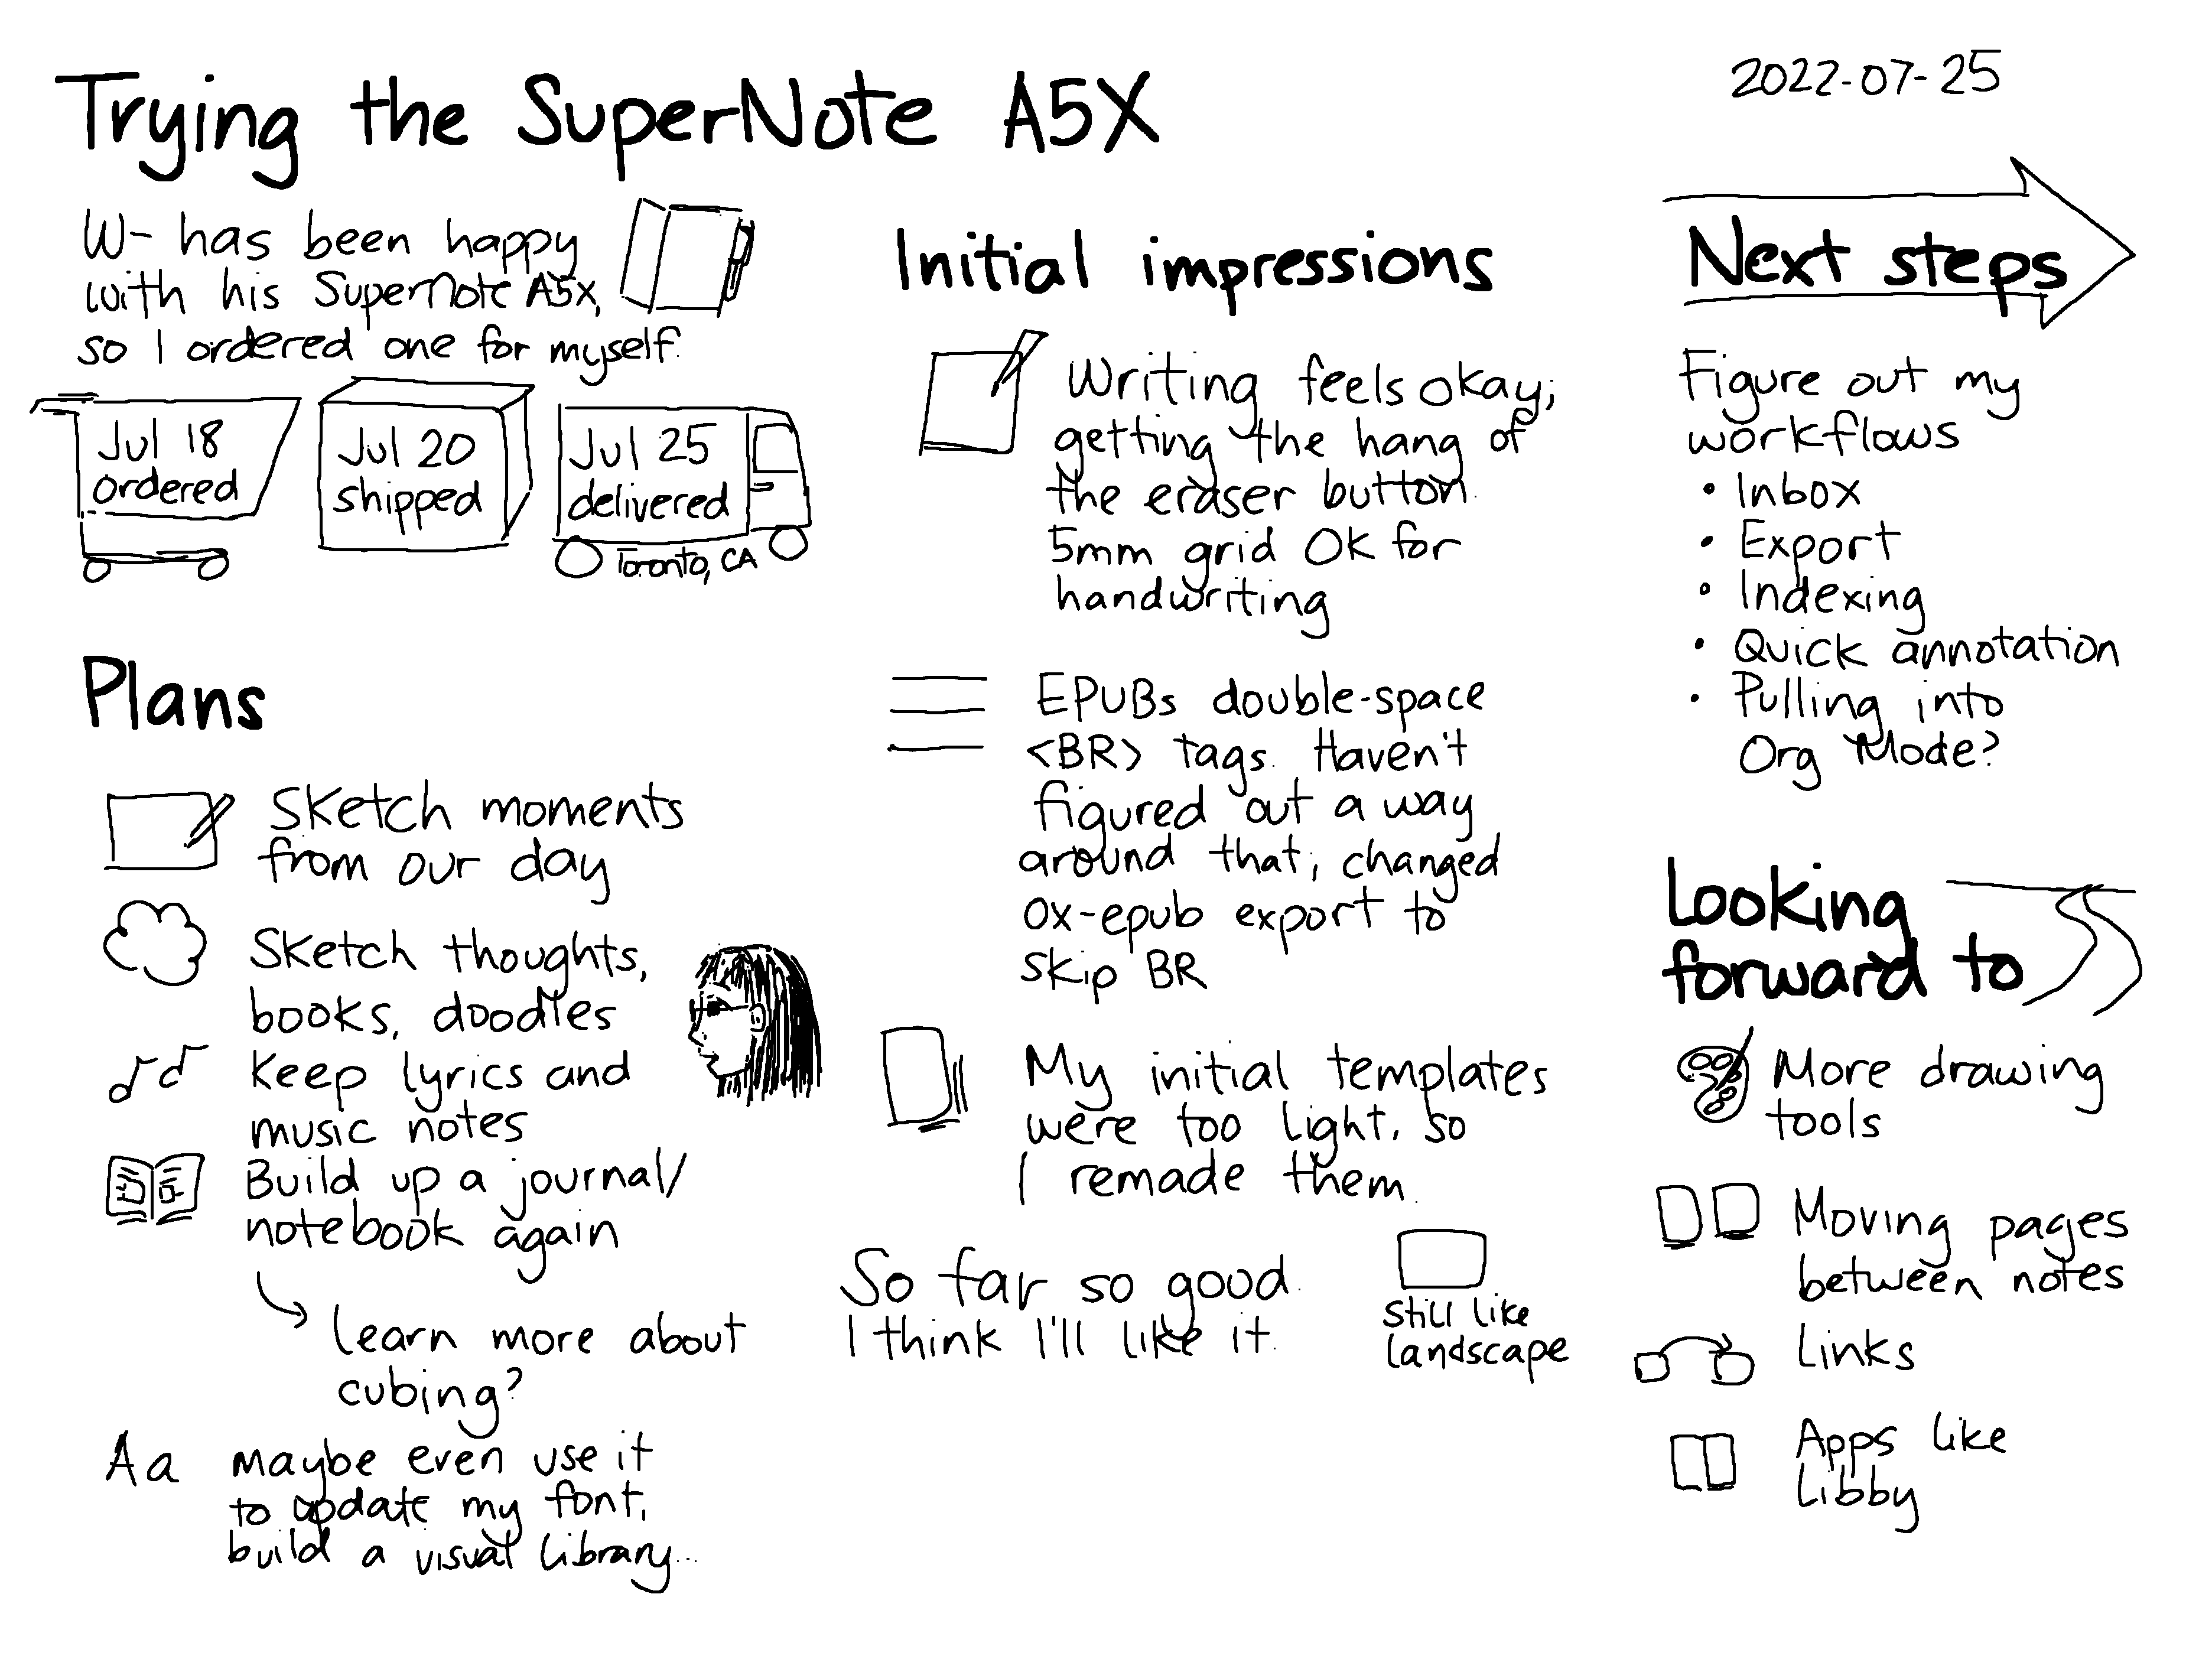 2022-07-25 Trying the SuperNote A5X